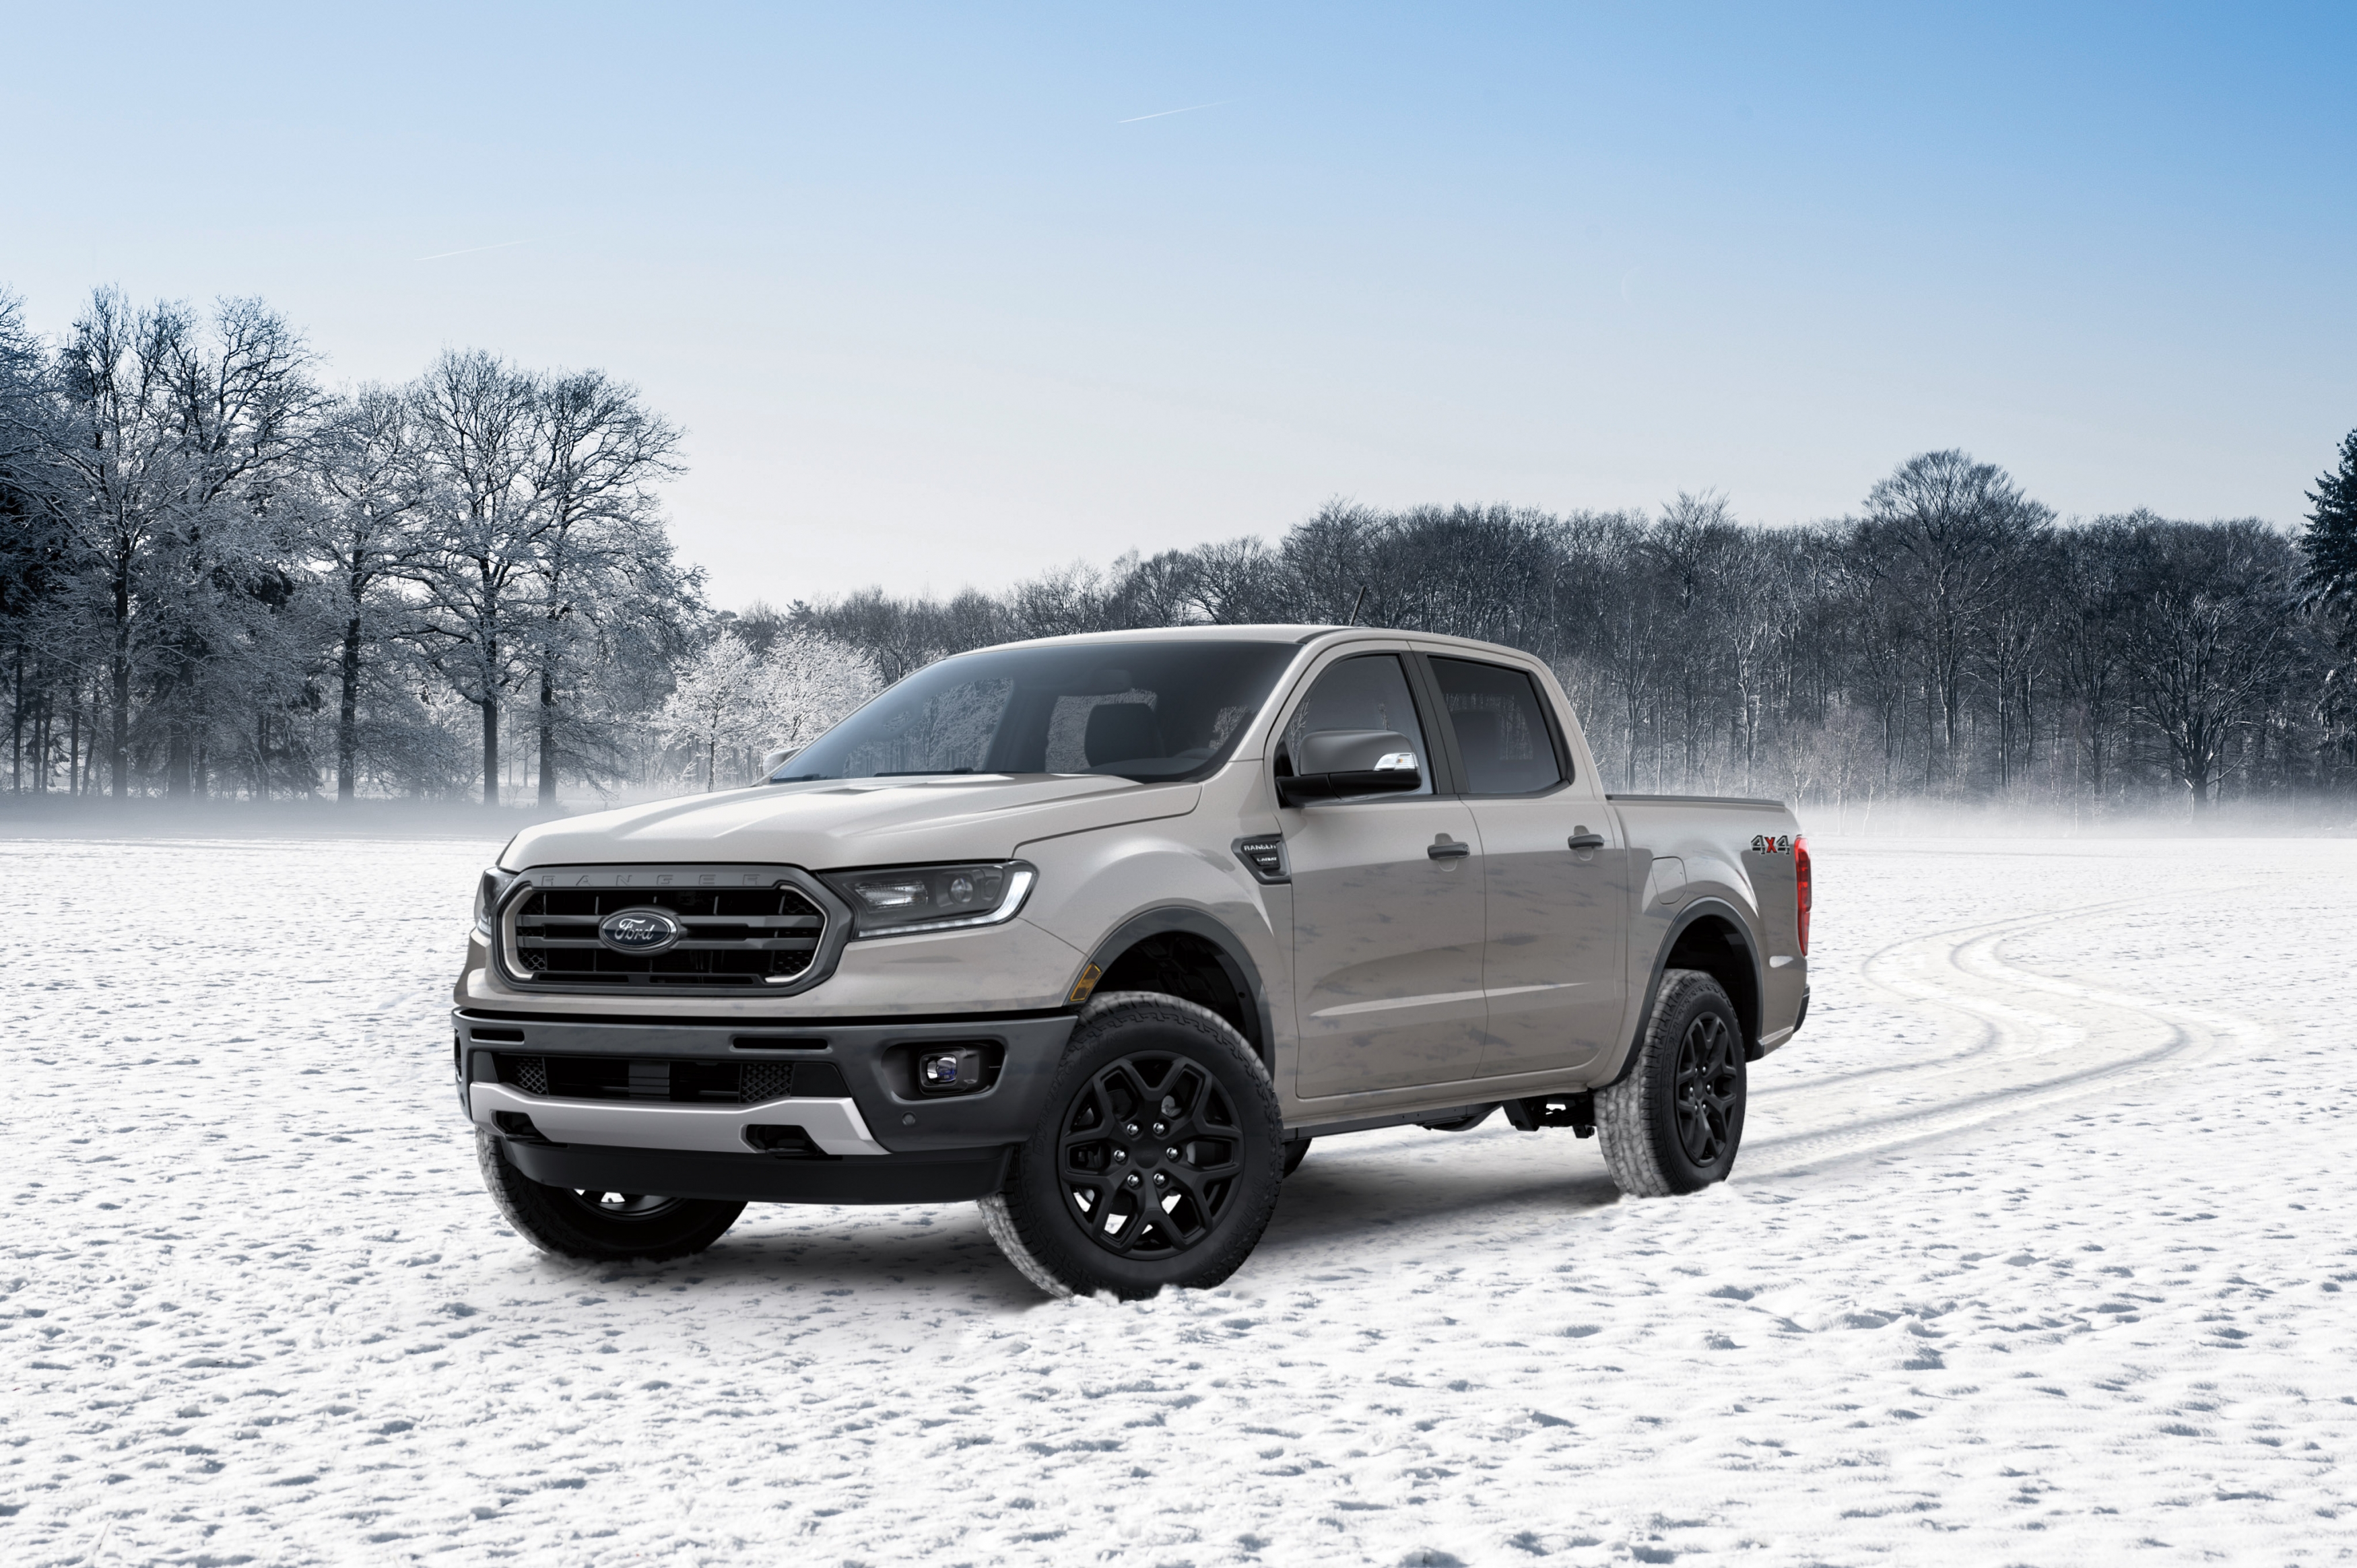 2022 Ford Ranger Makes A Splash, Receives Snow, Forest, and Sand Editions